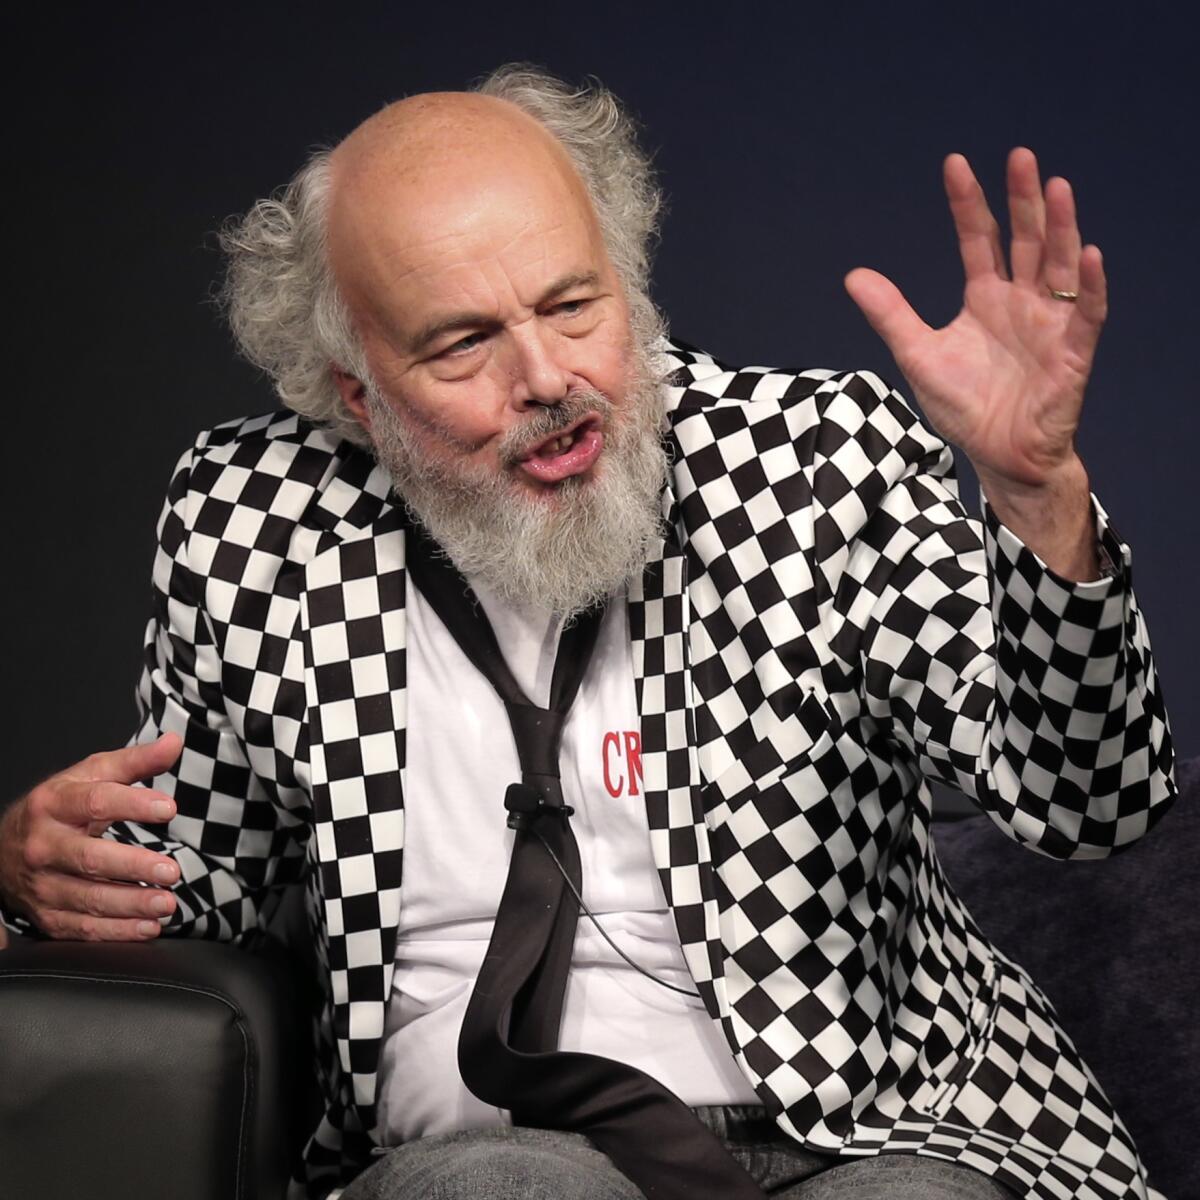 Clint Howard, in tie and checked jacket, gestures while speaking.